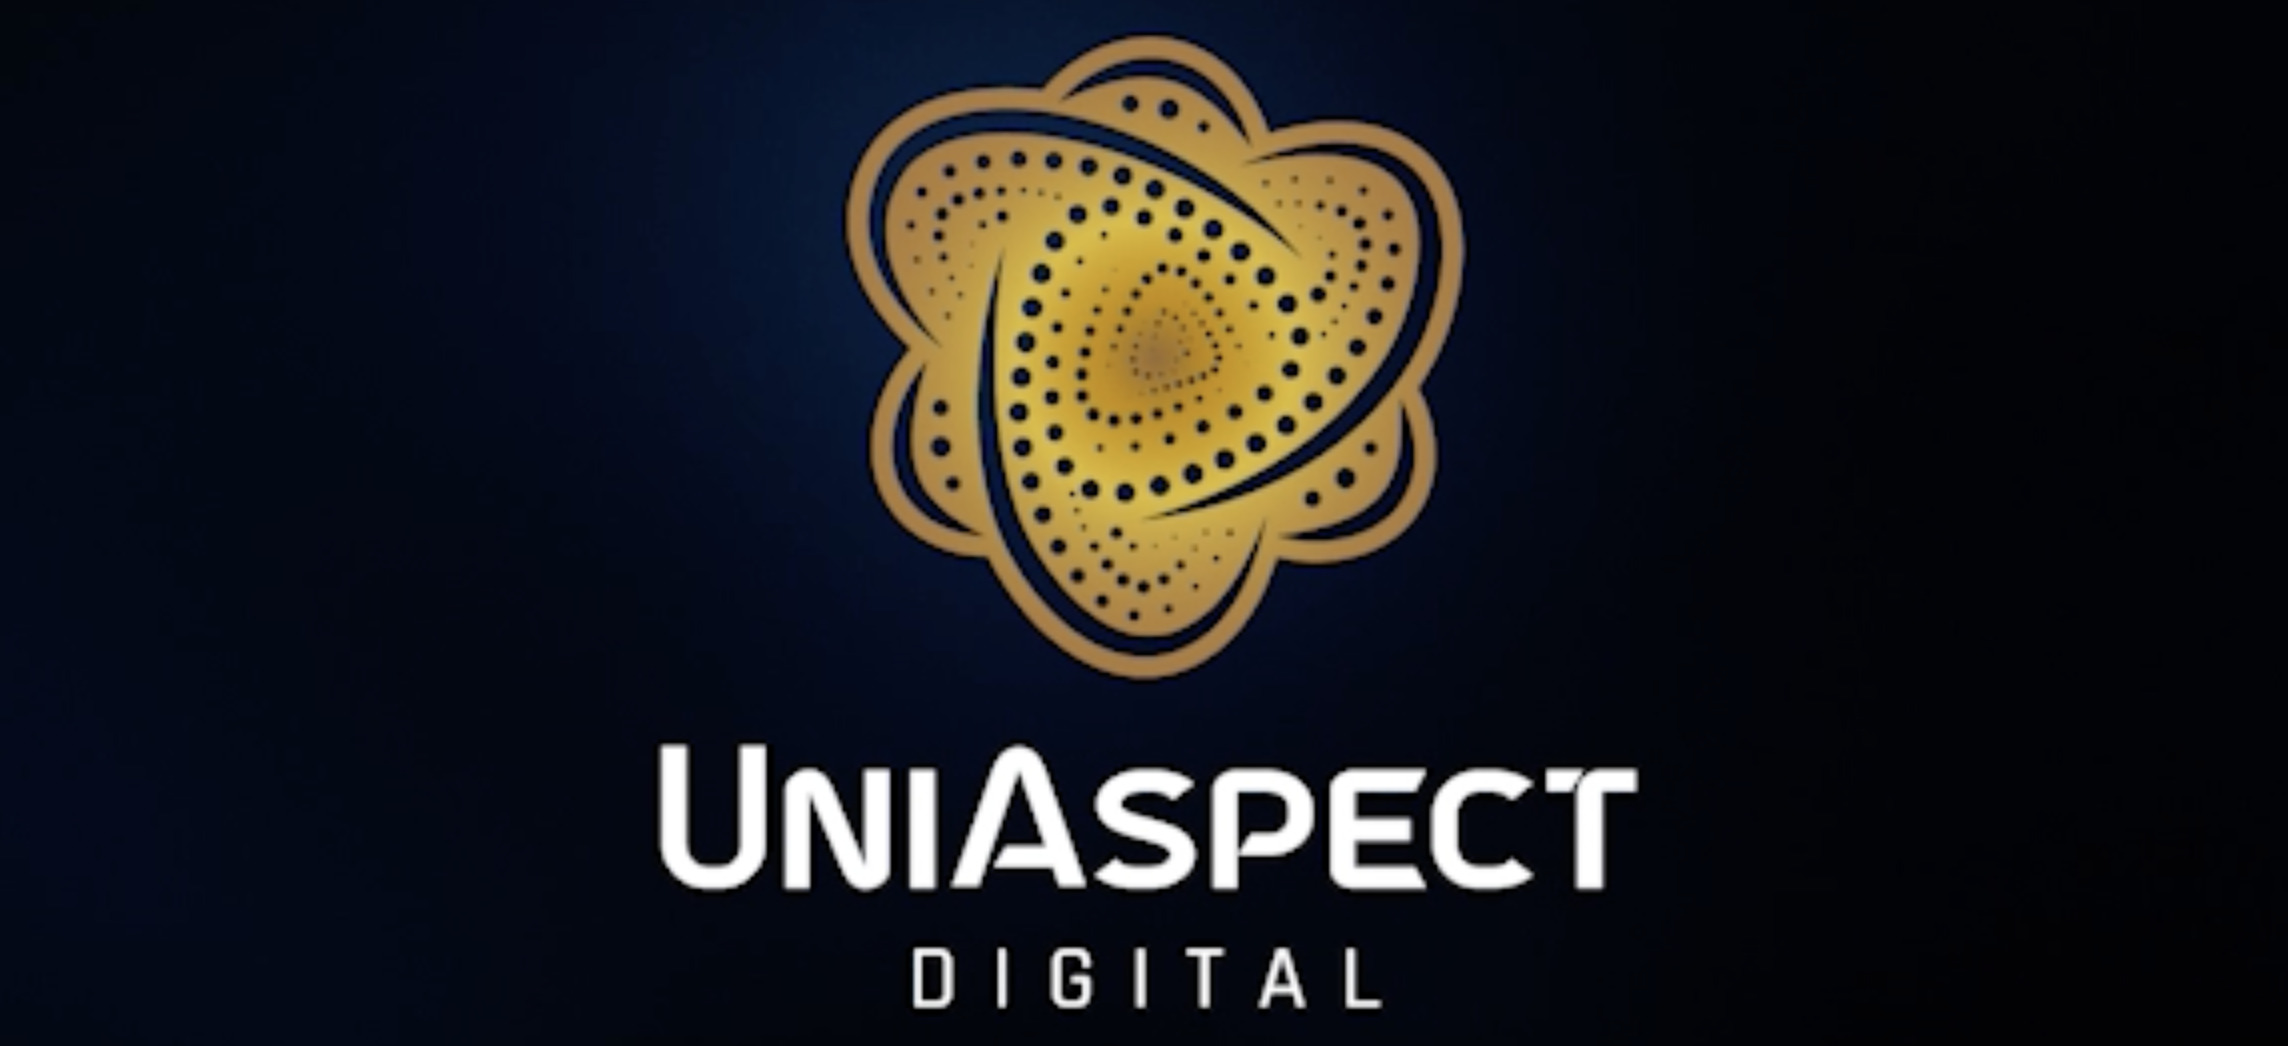 UniAspect Digital Launches to Offer Comprehensive Solutions for Digital Business Transformation Success 1